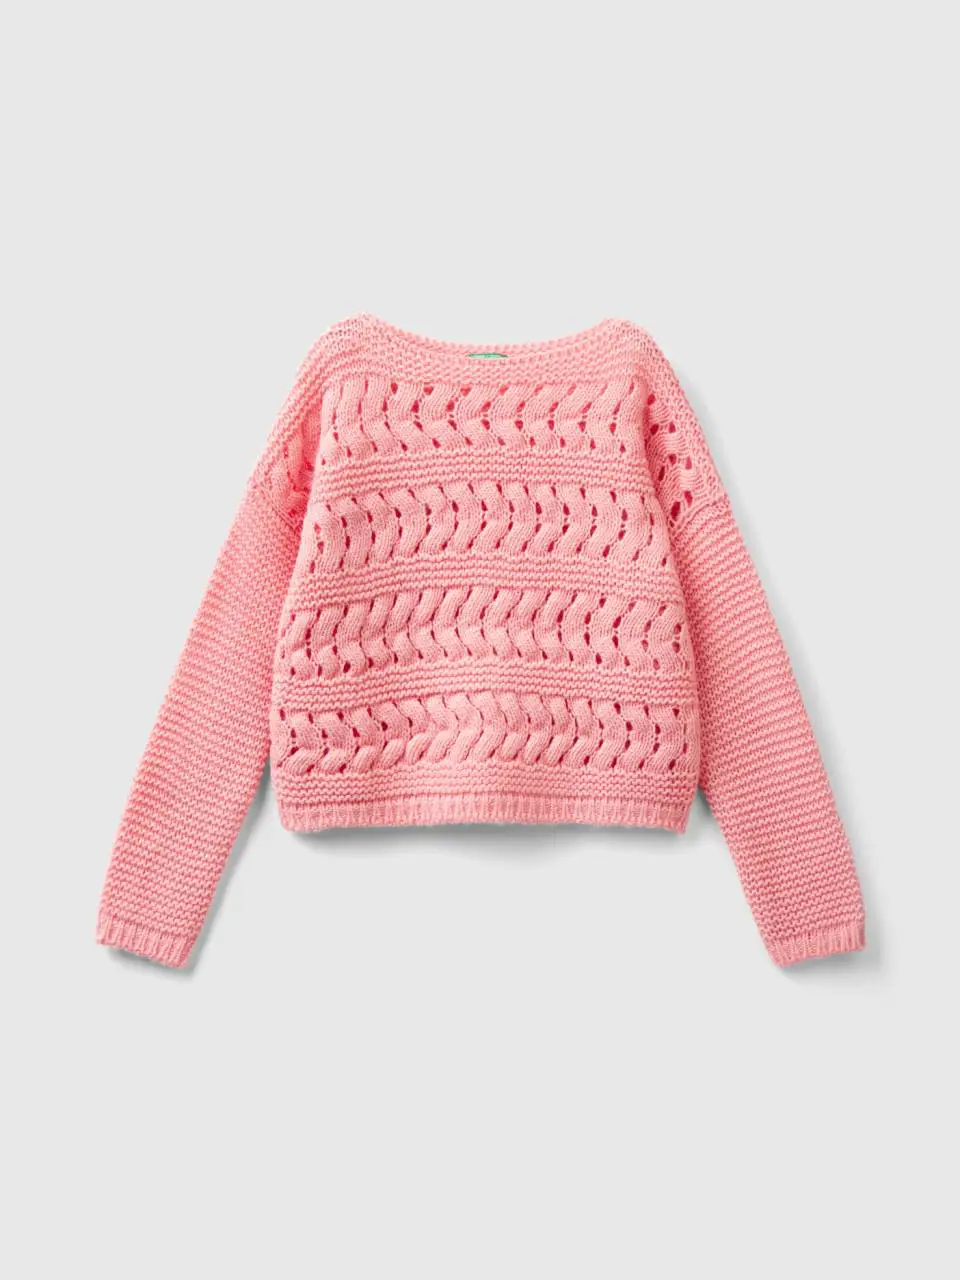 Benetton cable knit sweater in wool blend. 1